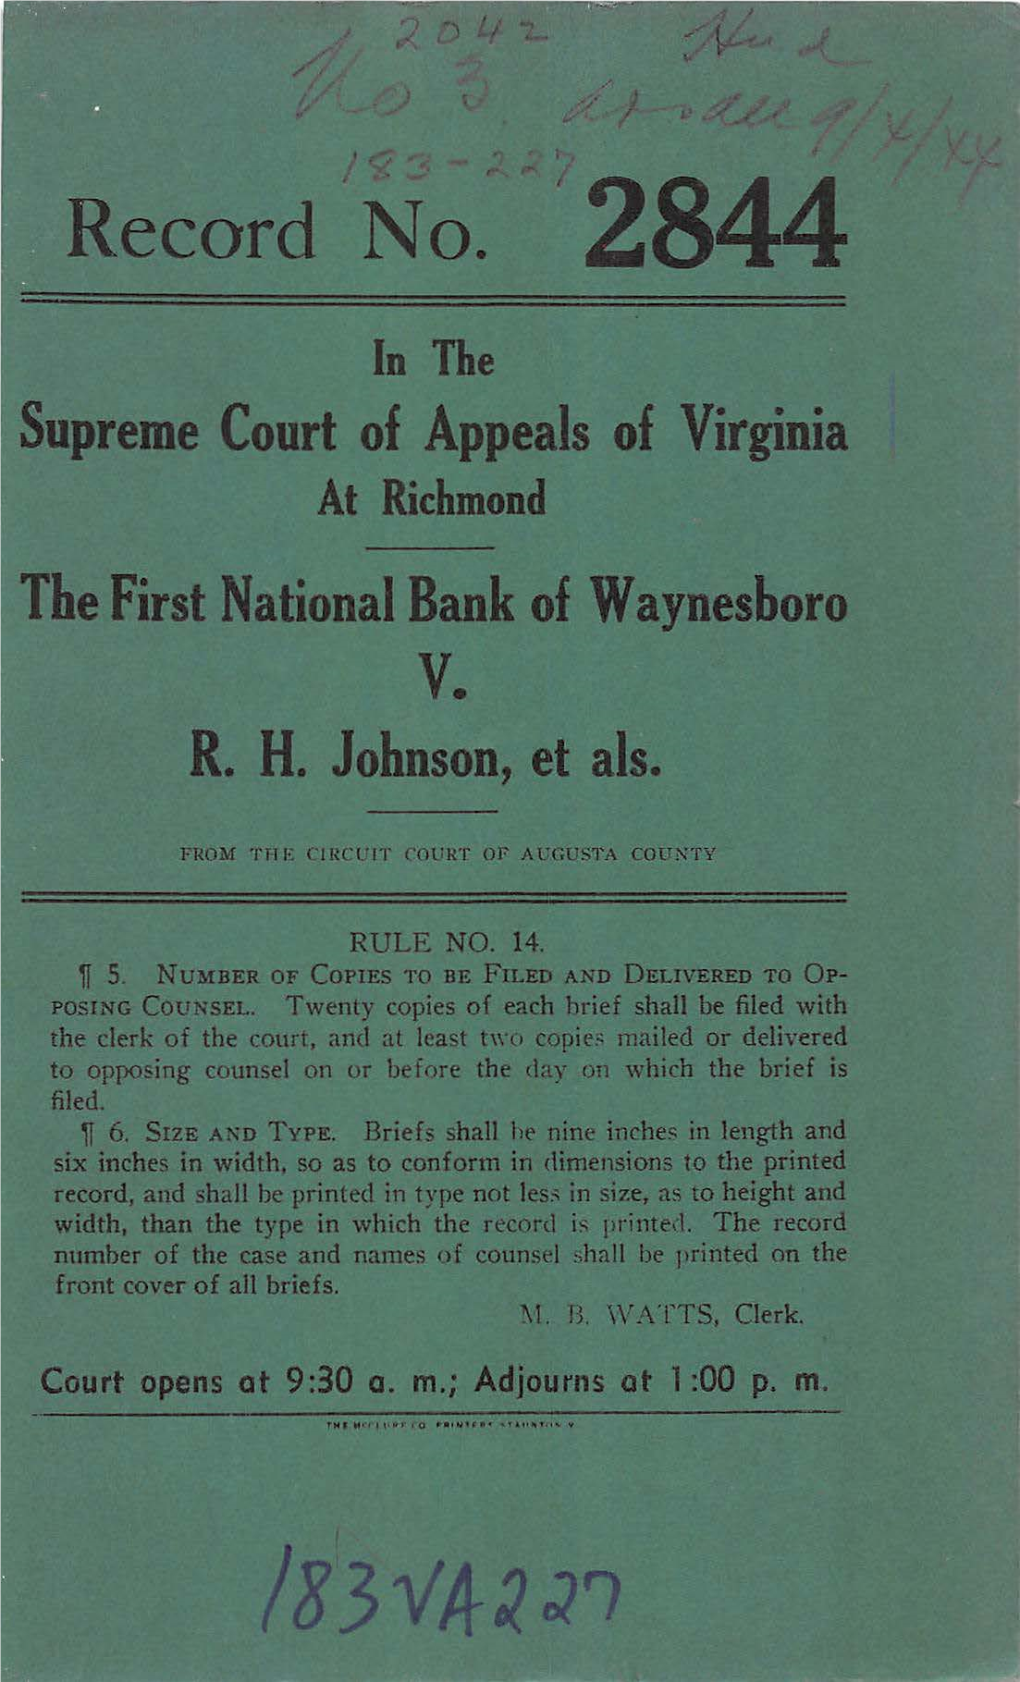 In the SUPREME COURT of APPEALS of VIRGINIA at Richmond